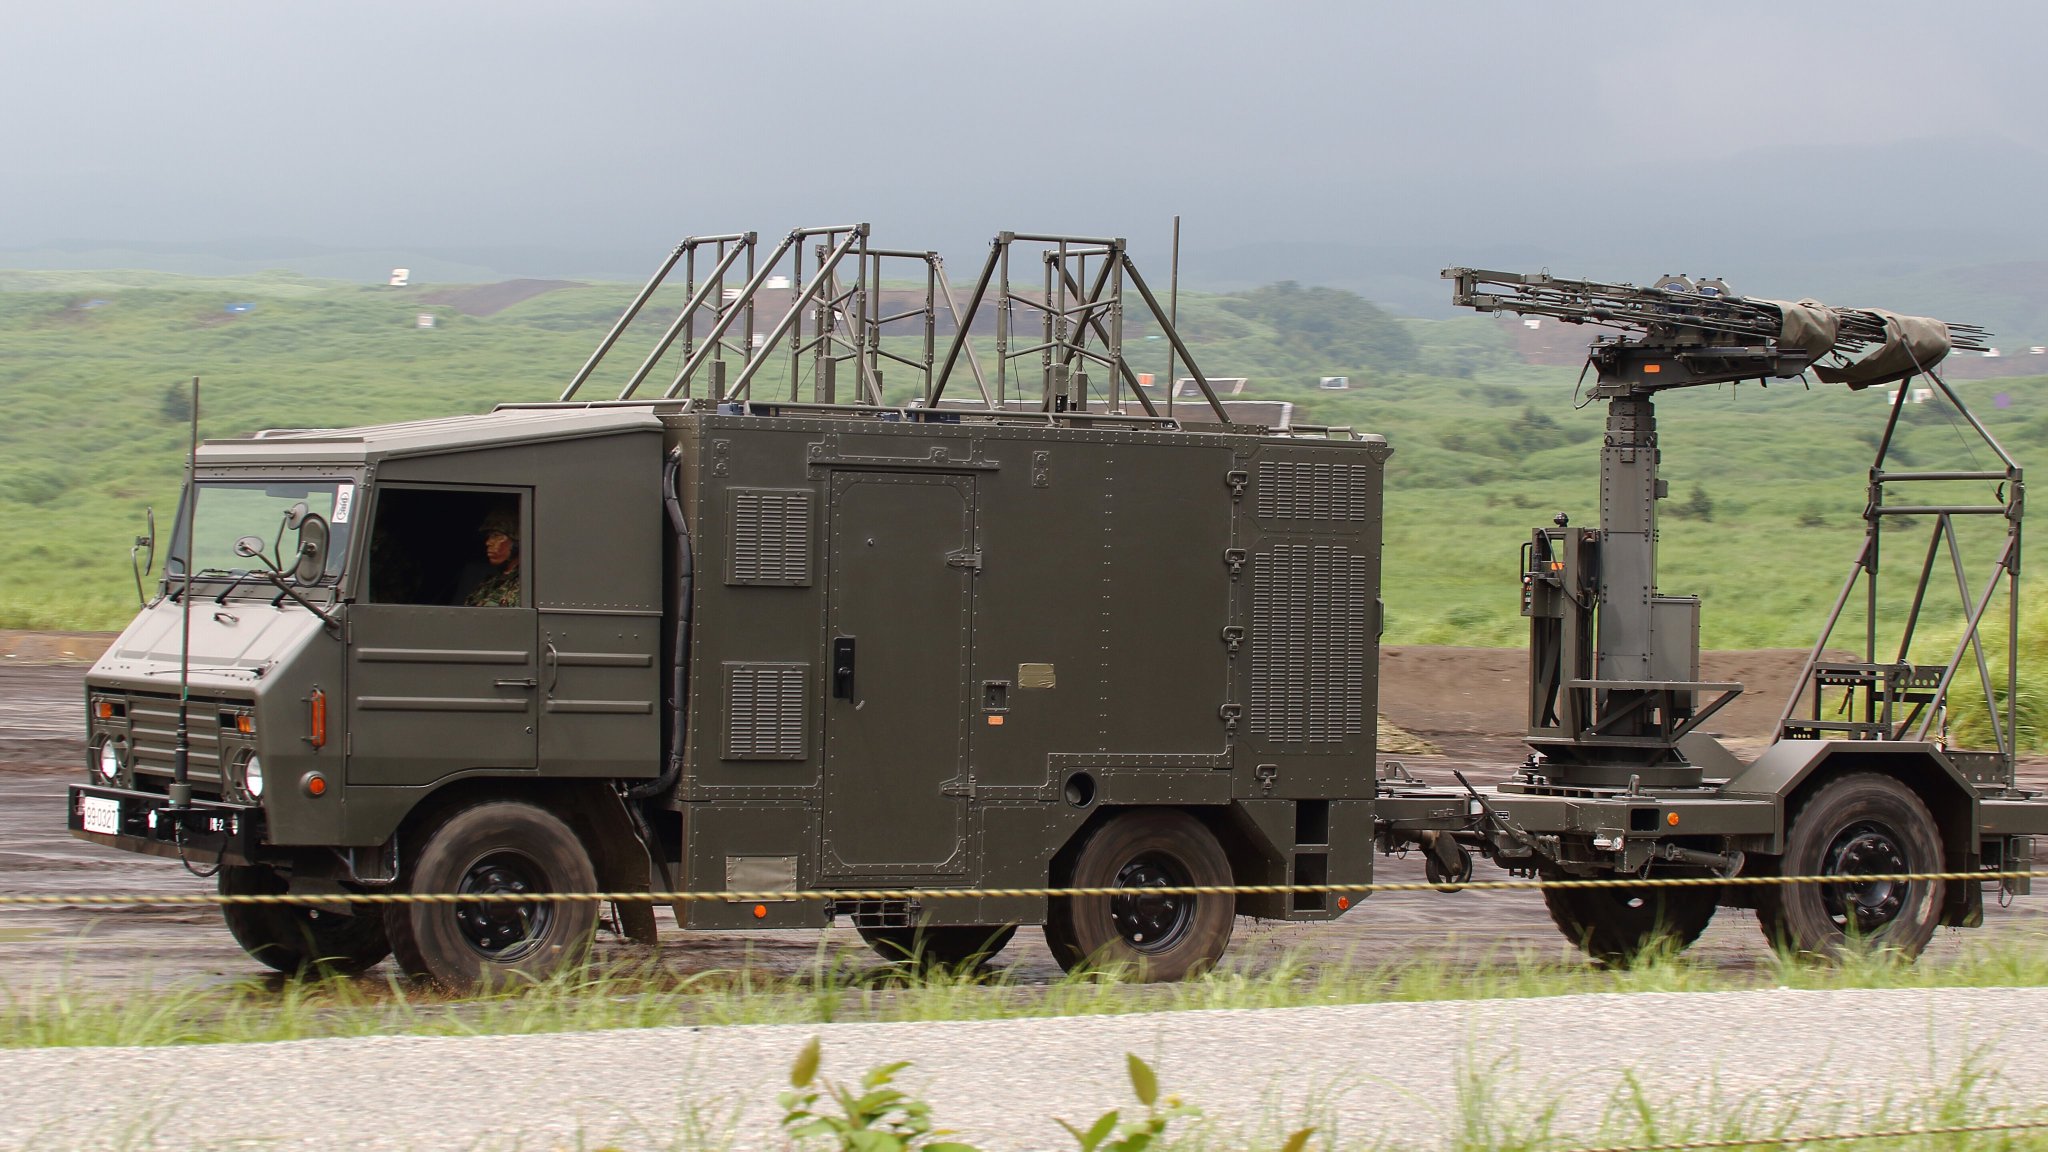 Japan Ground Self-Defense Force Network Electronic Warfare System (NEWS)